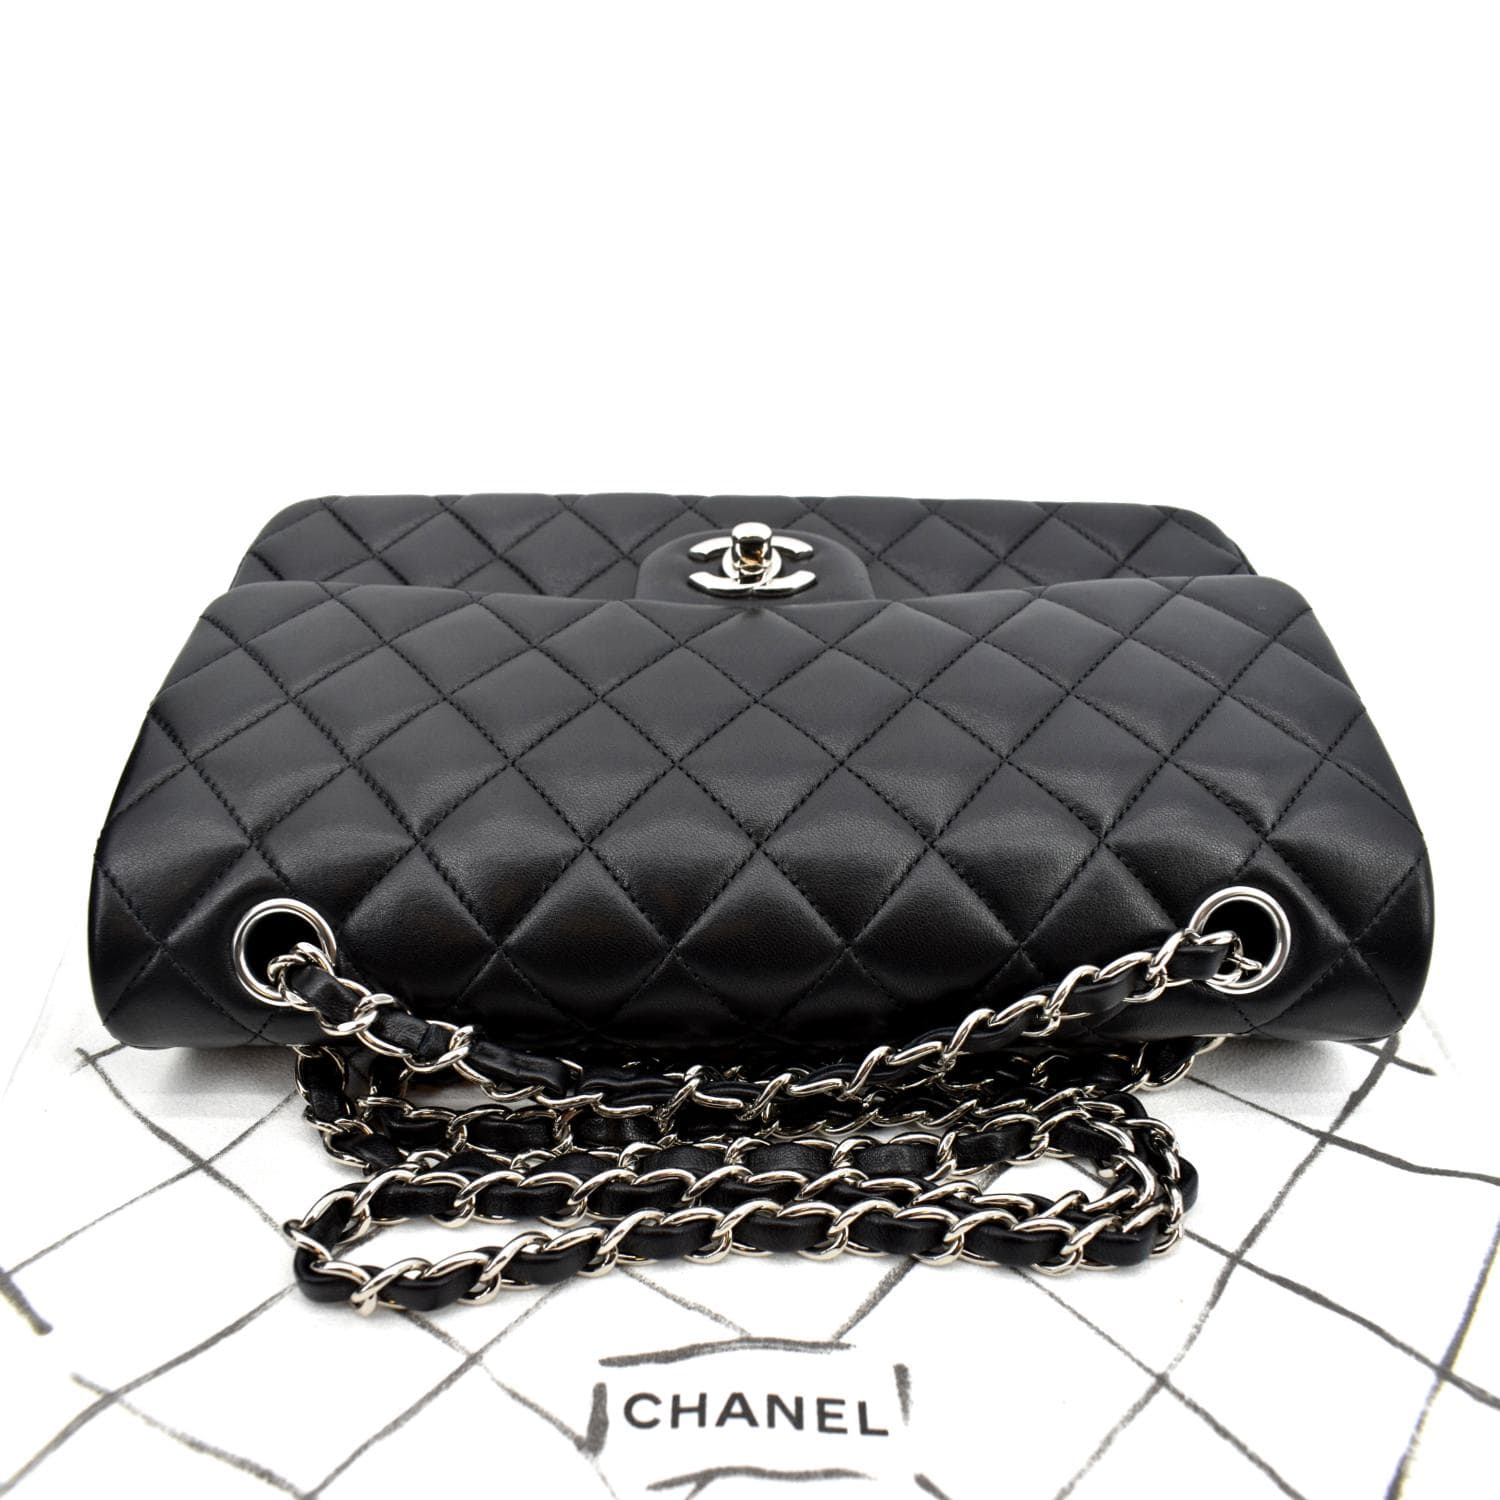 CHANEL Classic Medium Double Flap Quilted Leather Shoulder Bag Black